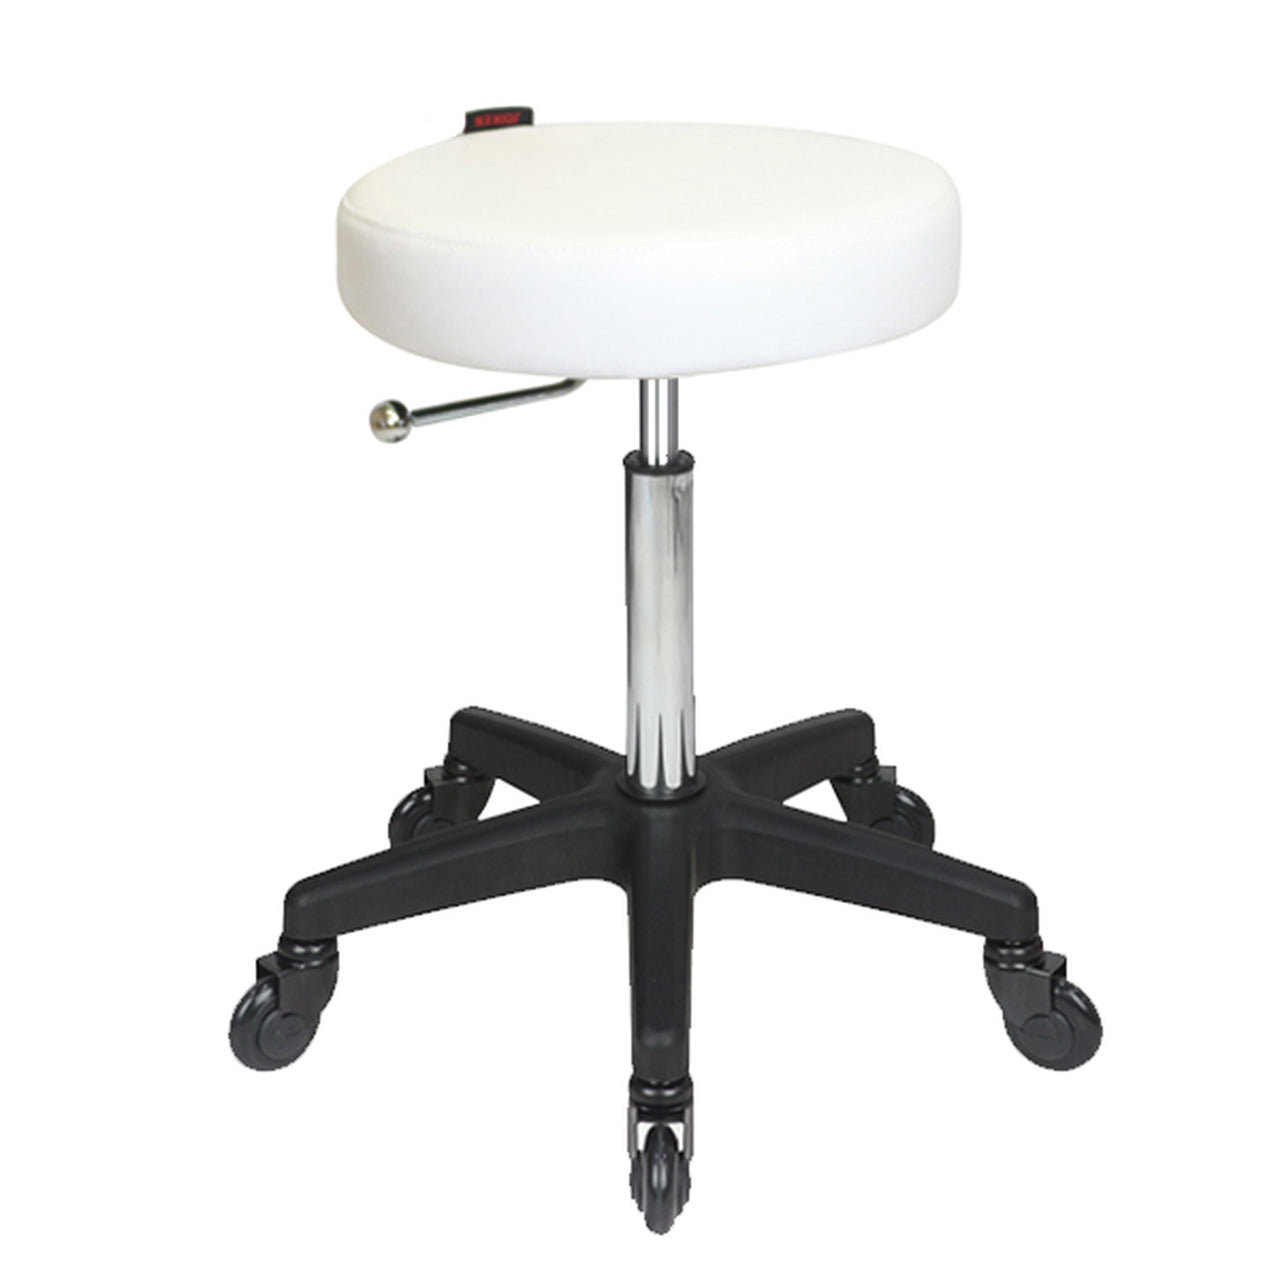 Turbo - Black Base (White Upholstery) With CLICK'NCLEAN
Castors